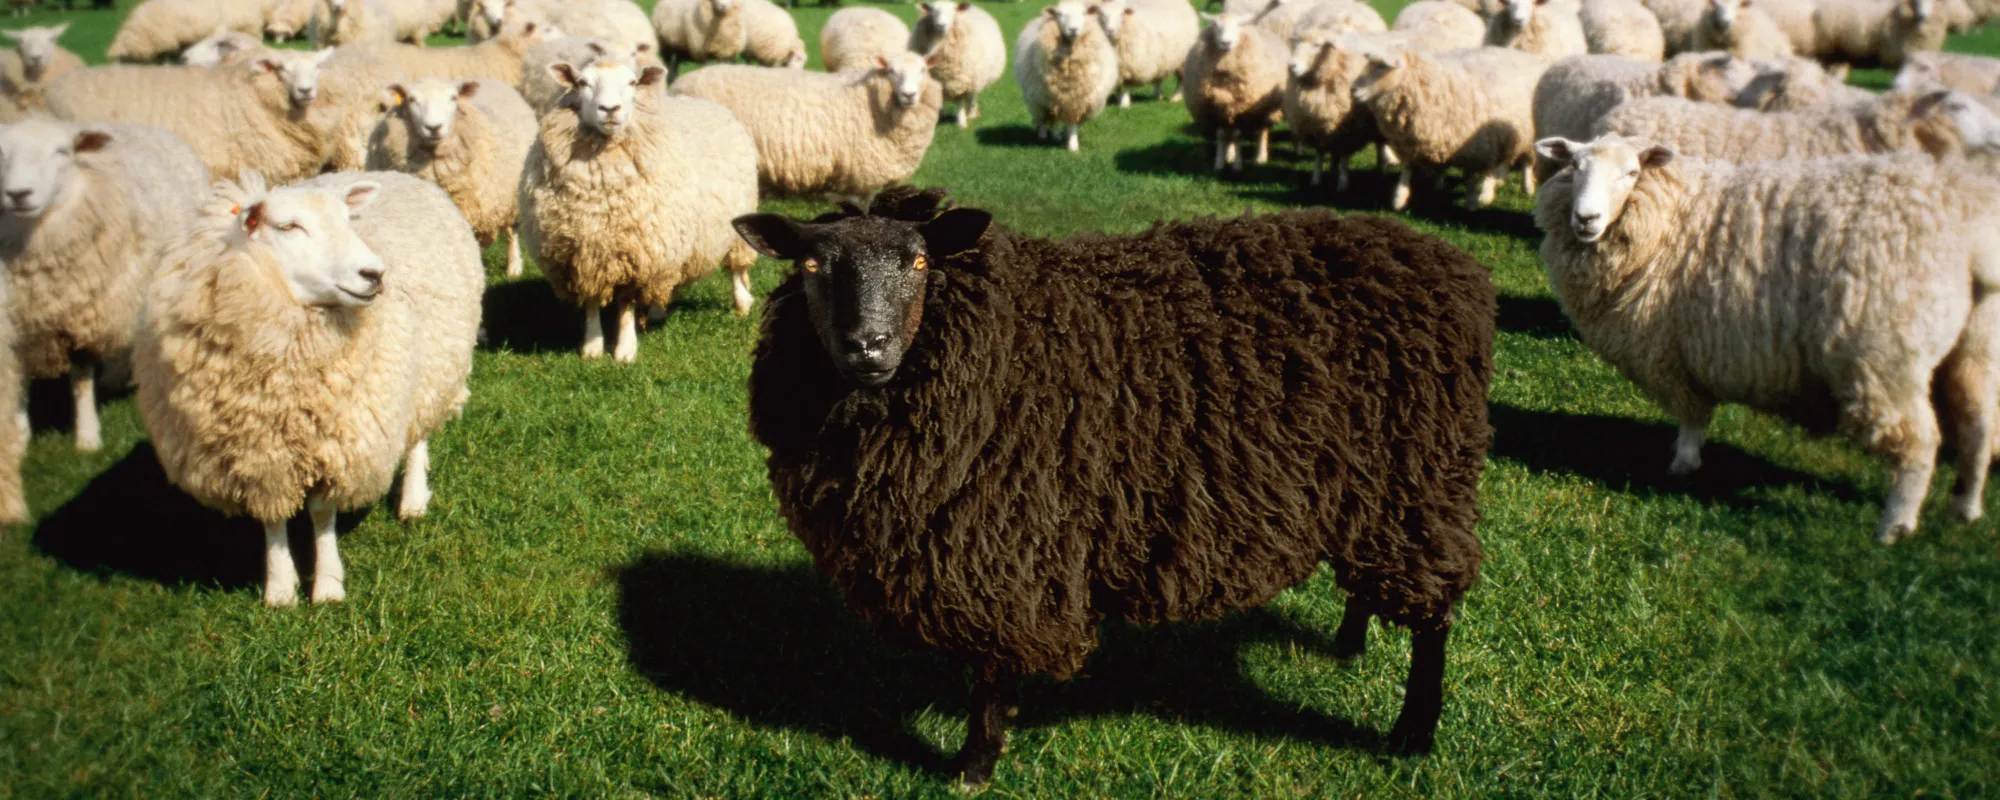 Behind the Meaning and the History of the Traditional Nursery Rhyme “Baa, Baa, Black Sheep”